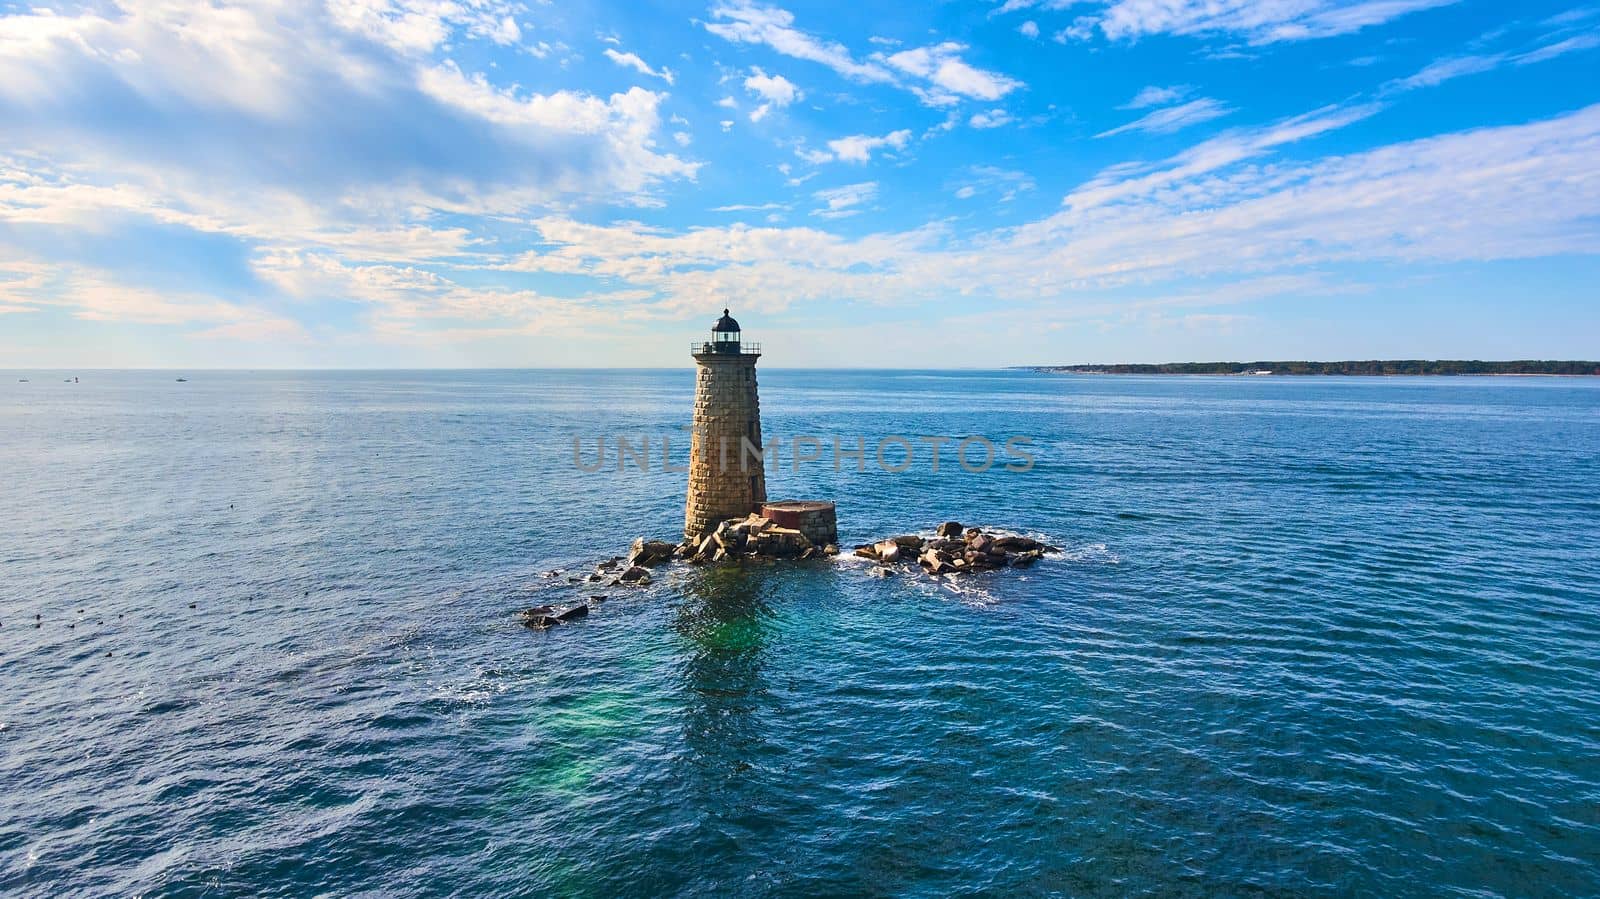 Lone stone lighthouse tower in middle of water with collapse rock rubble in Maine by njproductions